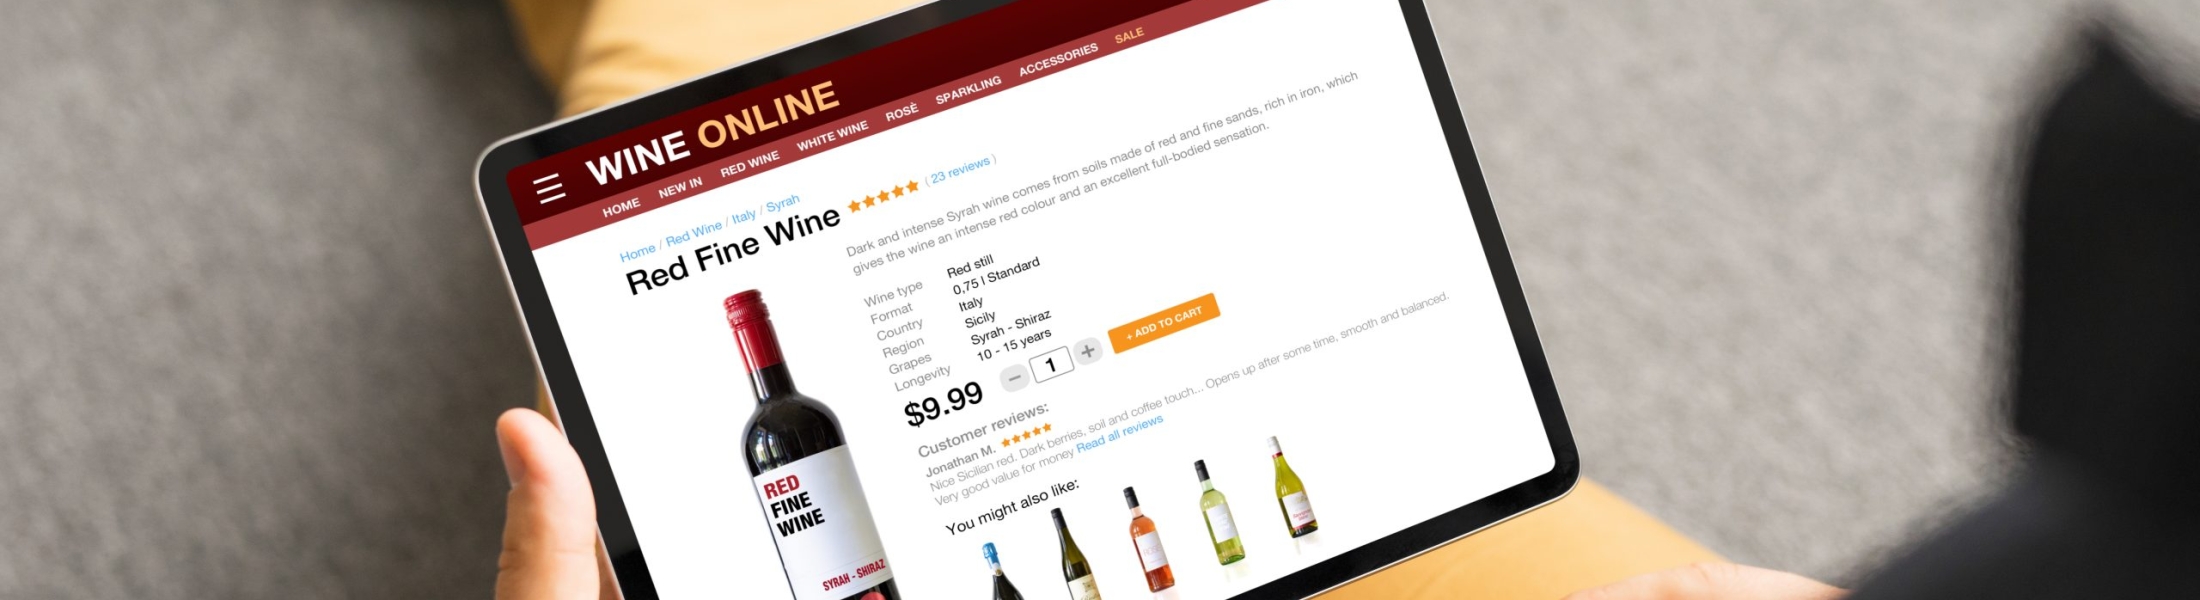 Online alcohol retailers it’s time to get serious about age